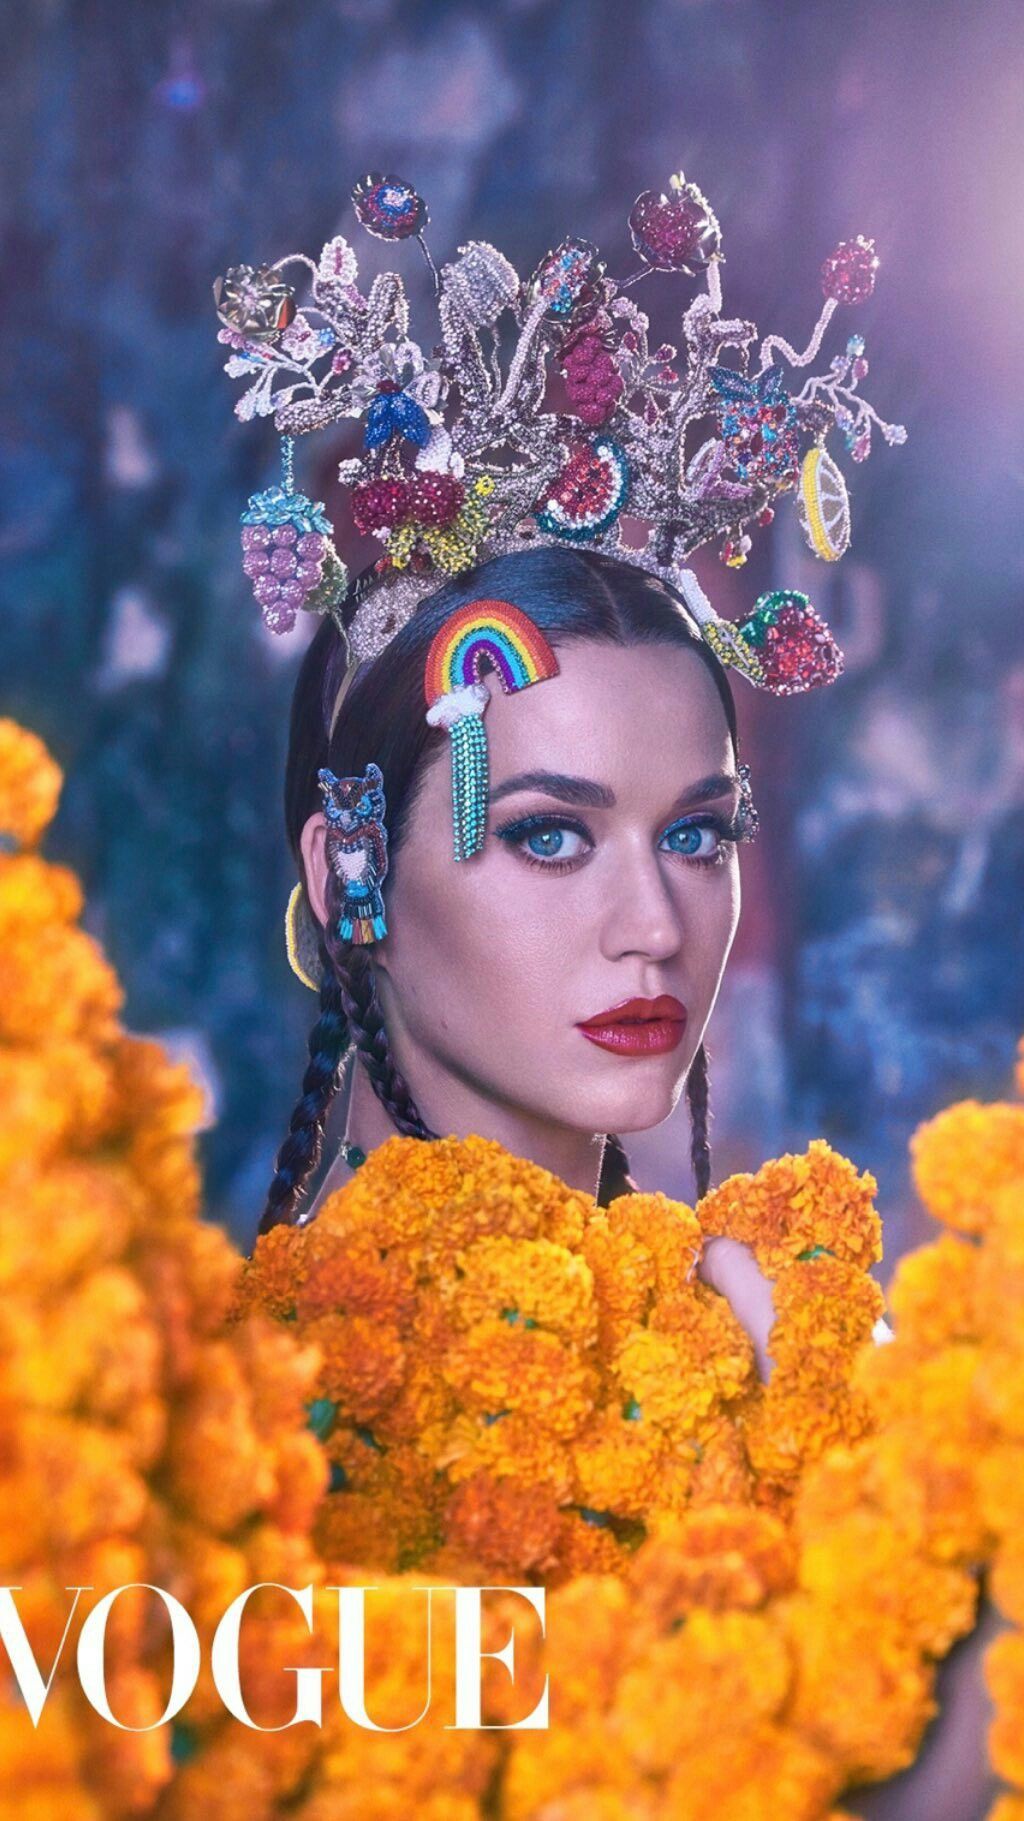 Katy Perry 2020 Wallpapers